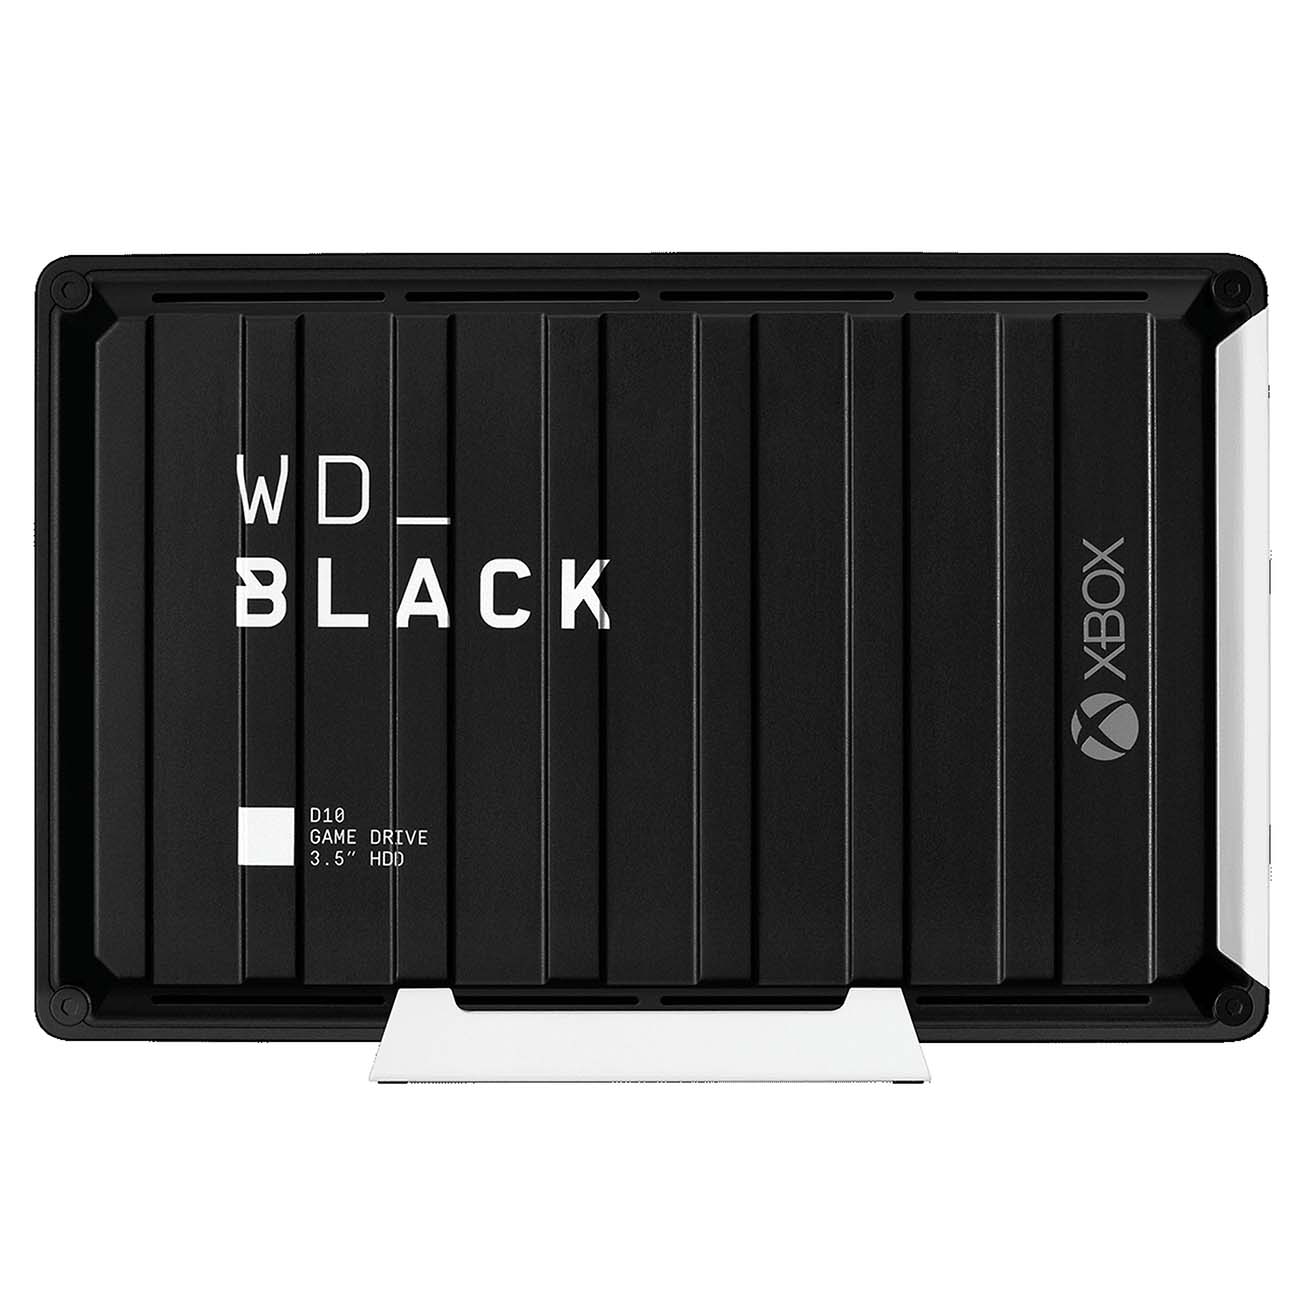 Внешний HDD WD BLACK D10 Game Drive for Xbox One 12TB fantasia music evolved xbox 360